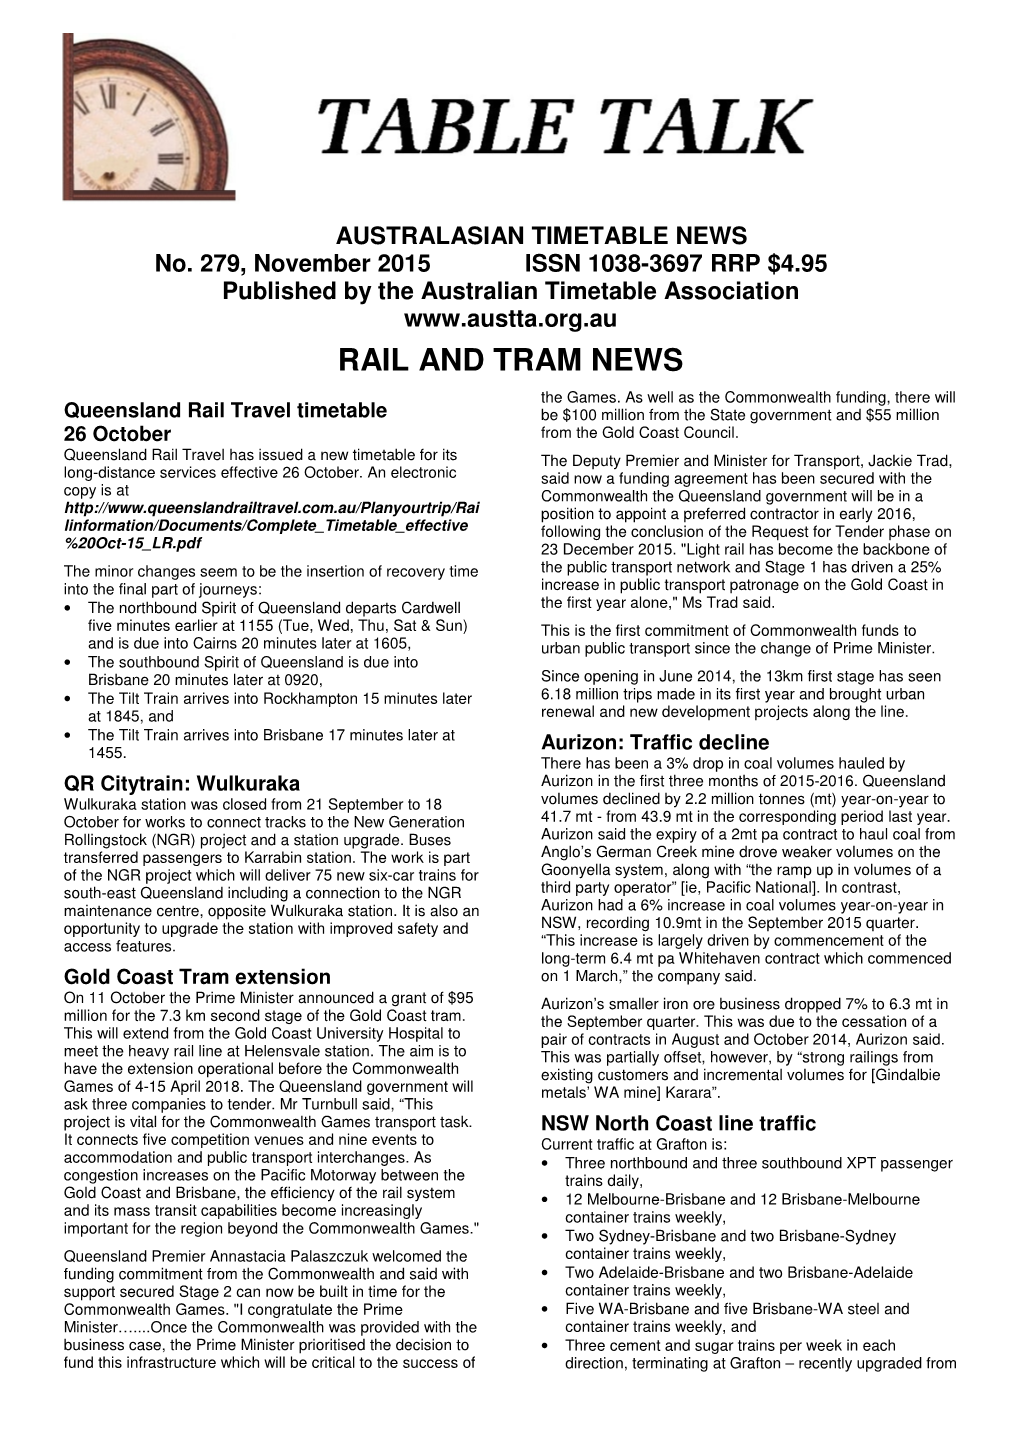 RAIL and TRAM NEWS the Games